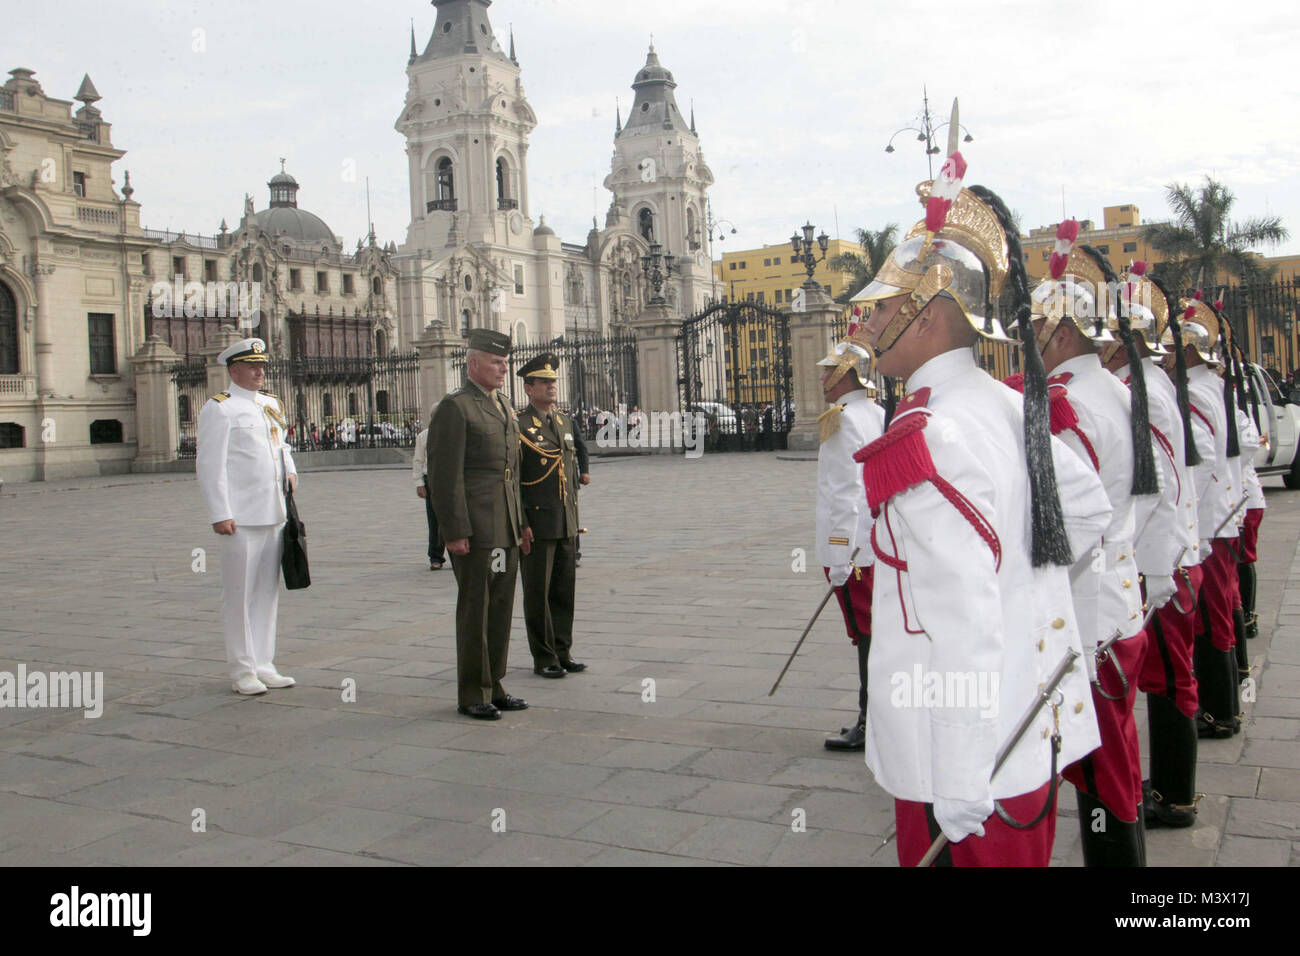 LIMA, Peru (Jan. 22, 2013) -- Marine Gen. John Kelly, commander of U.S. Southern Command, stands at attention before the Ceremonial Guard at the Presidential Palace prior to meeting with Peruvian President Ollanta Humala.  Kelly was in Peru to meet with senior defense and government officials to discuss shared security concerns and cooperation.  (Photo courtesy of Presidential Palace, Peru) 130122-A-BS728-002 by ussouthcom Stock Photo